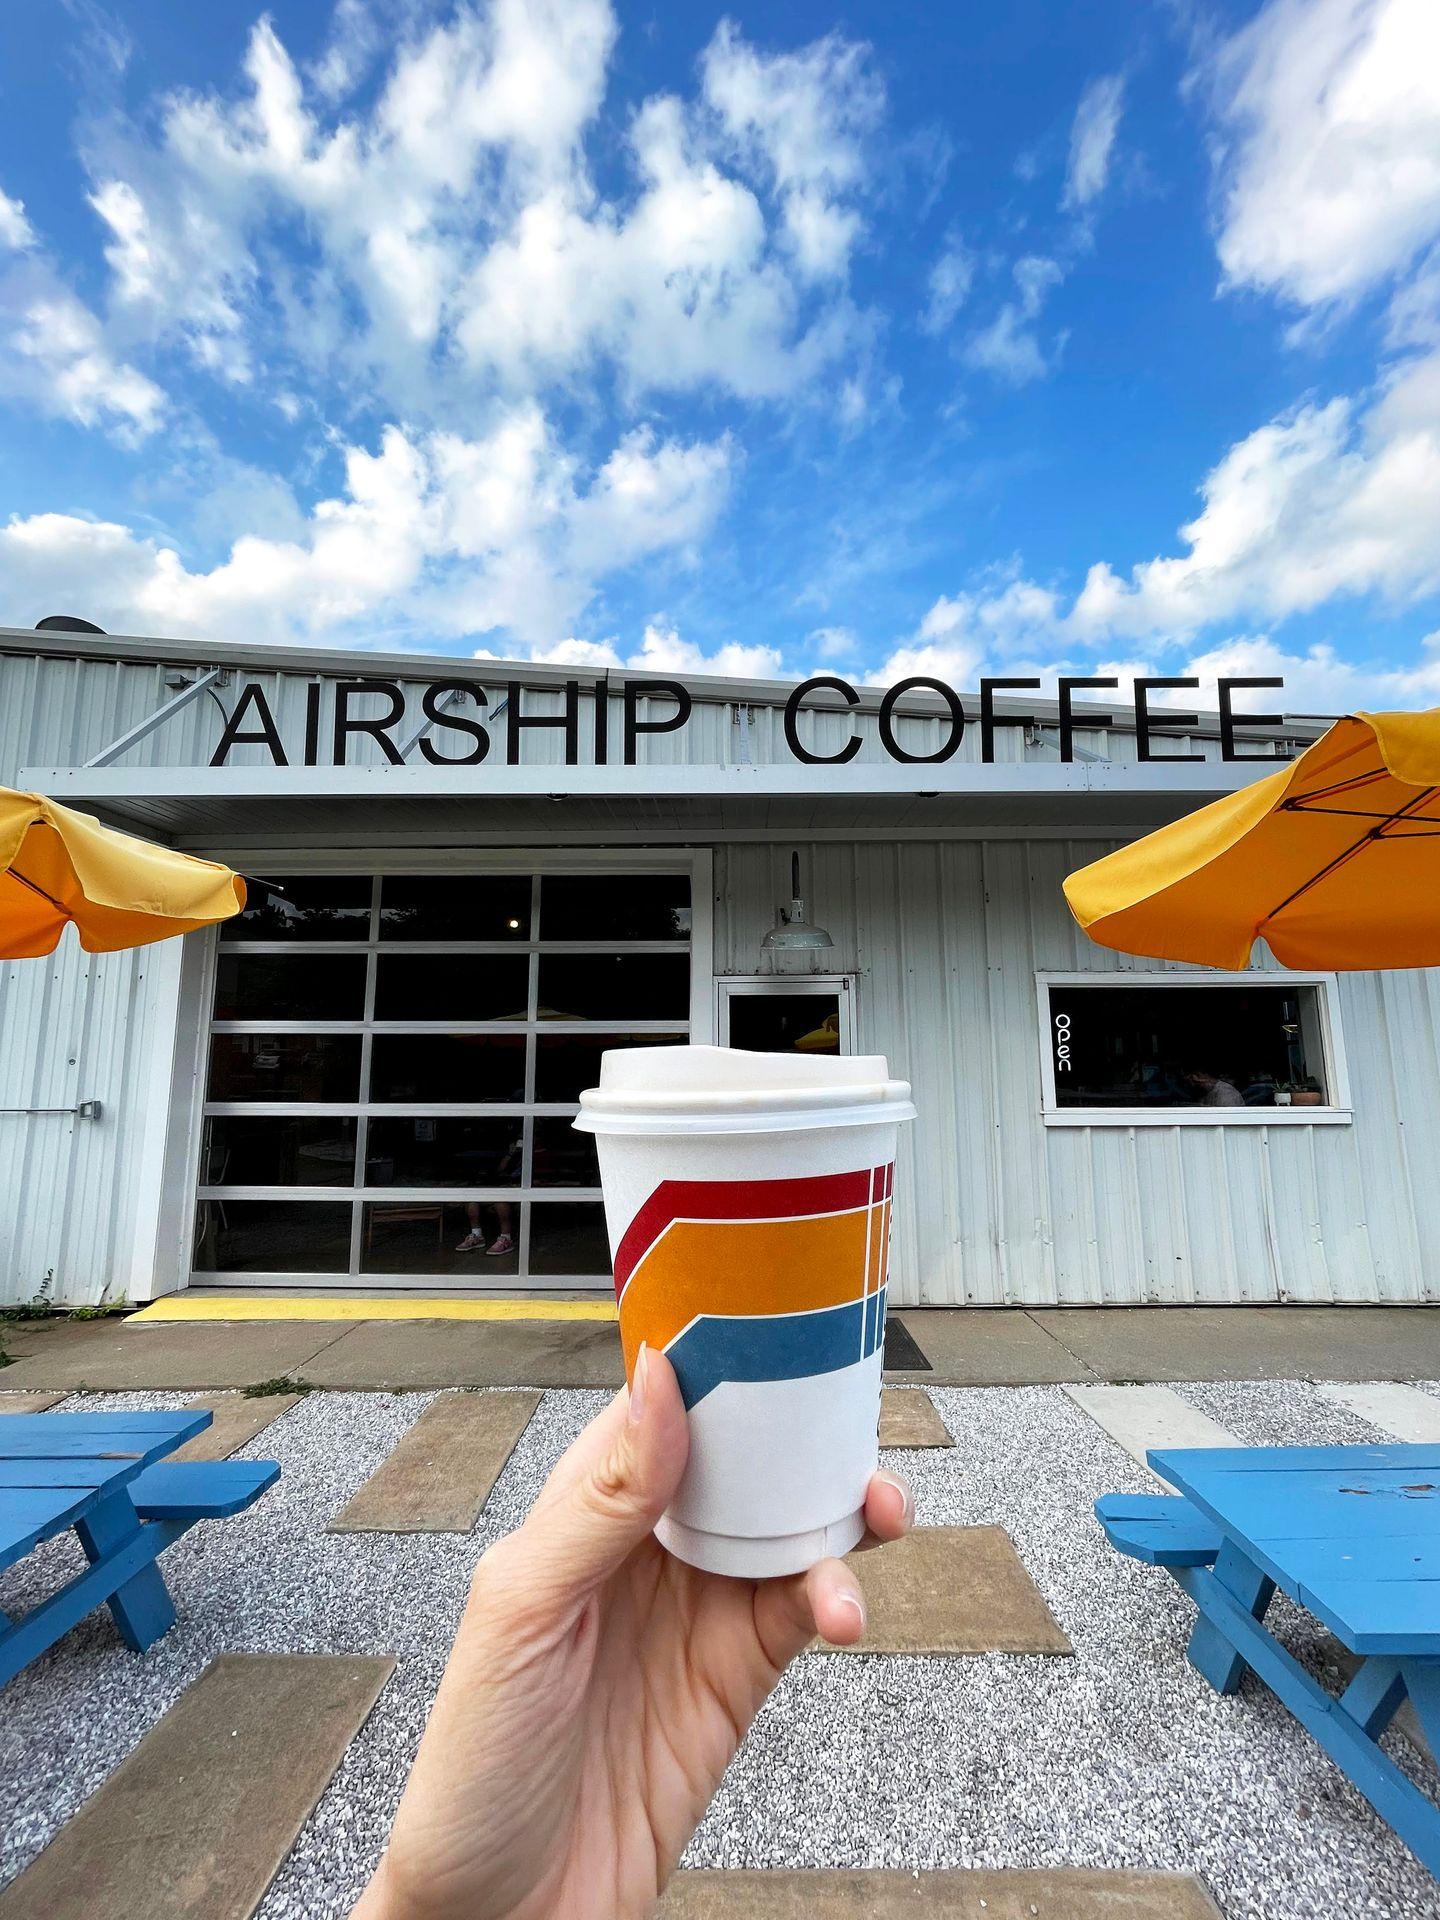 Holding up a to-go coffee mug that has a red, orange and blue stripe design. In the background is the exterior of Airship Coffee.